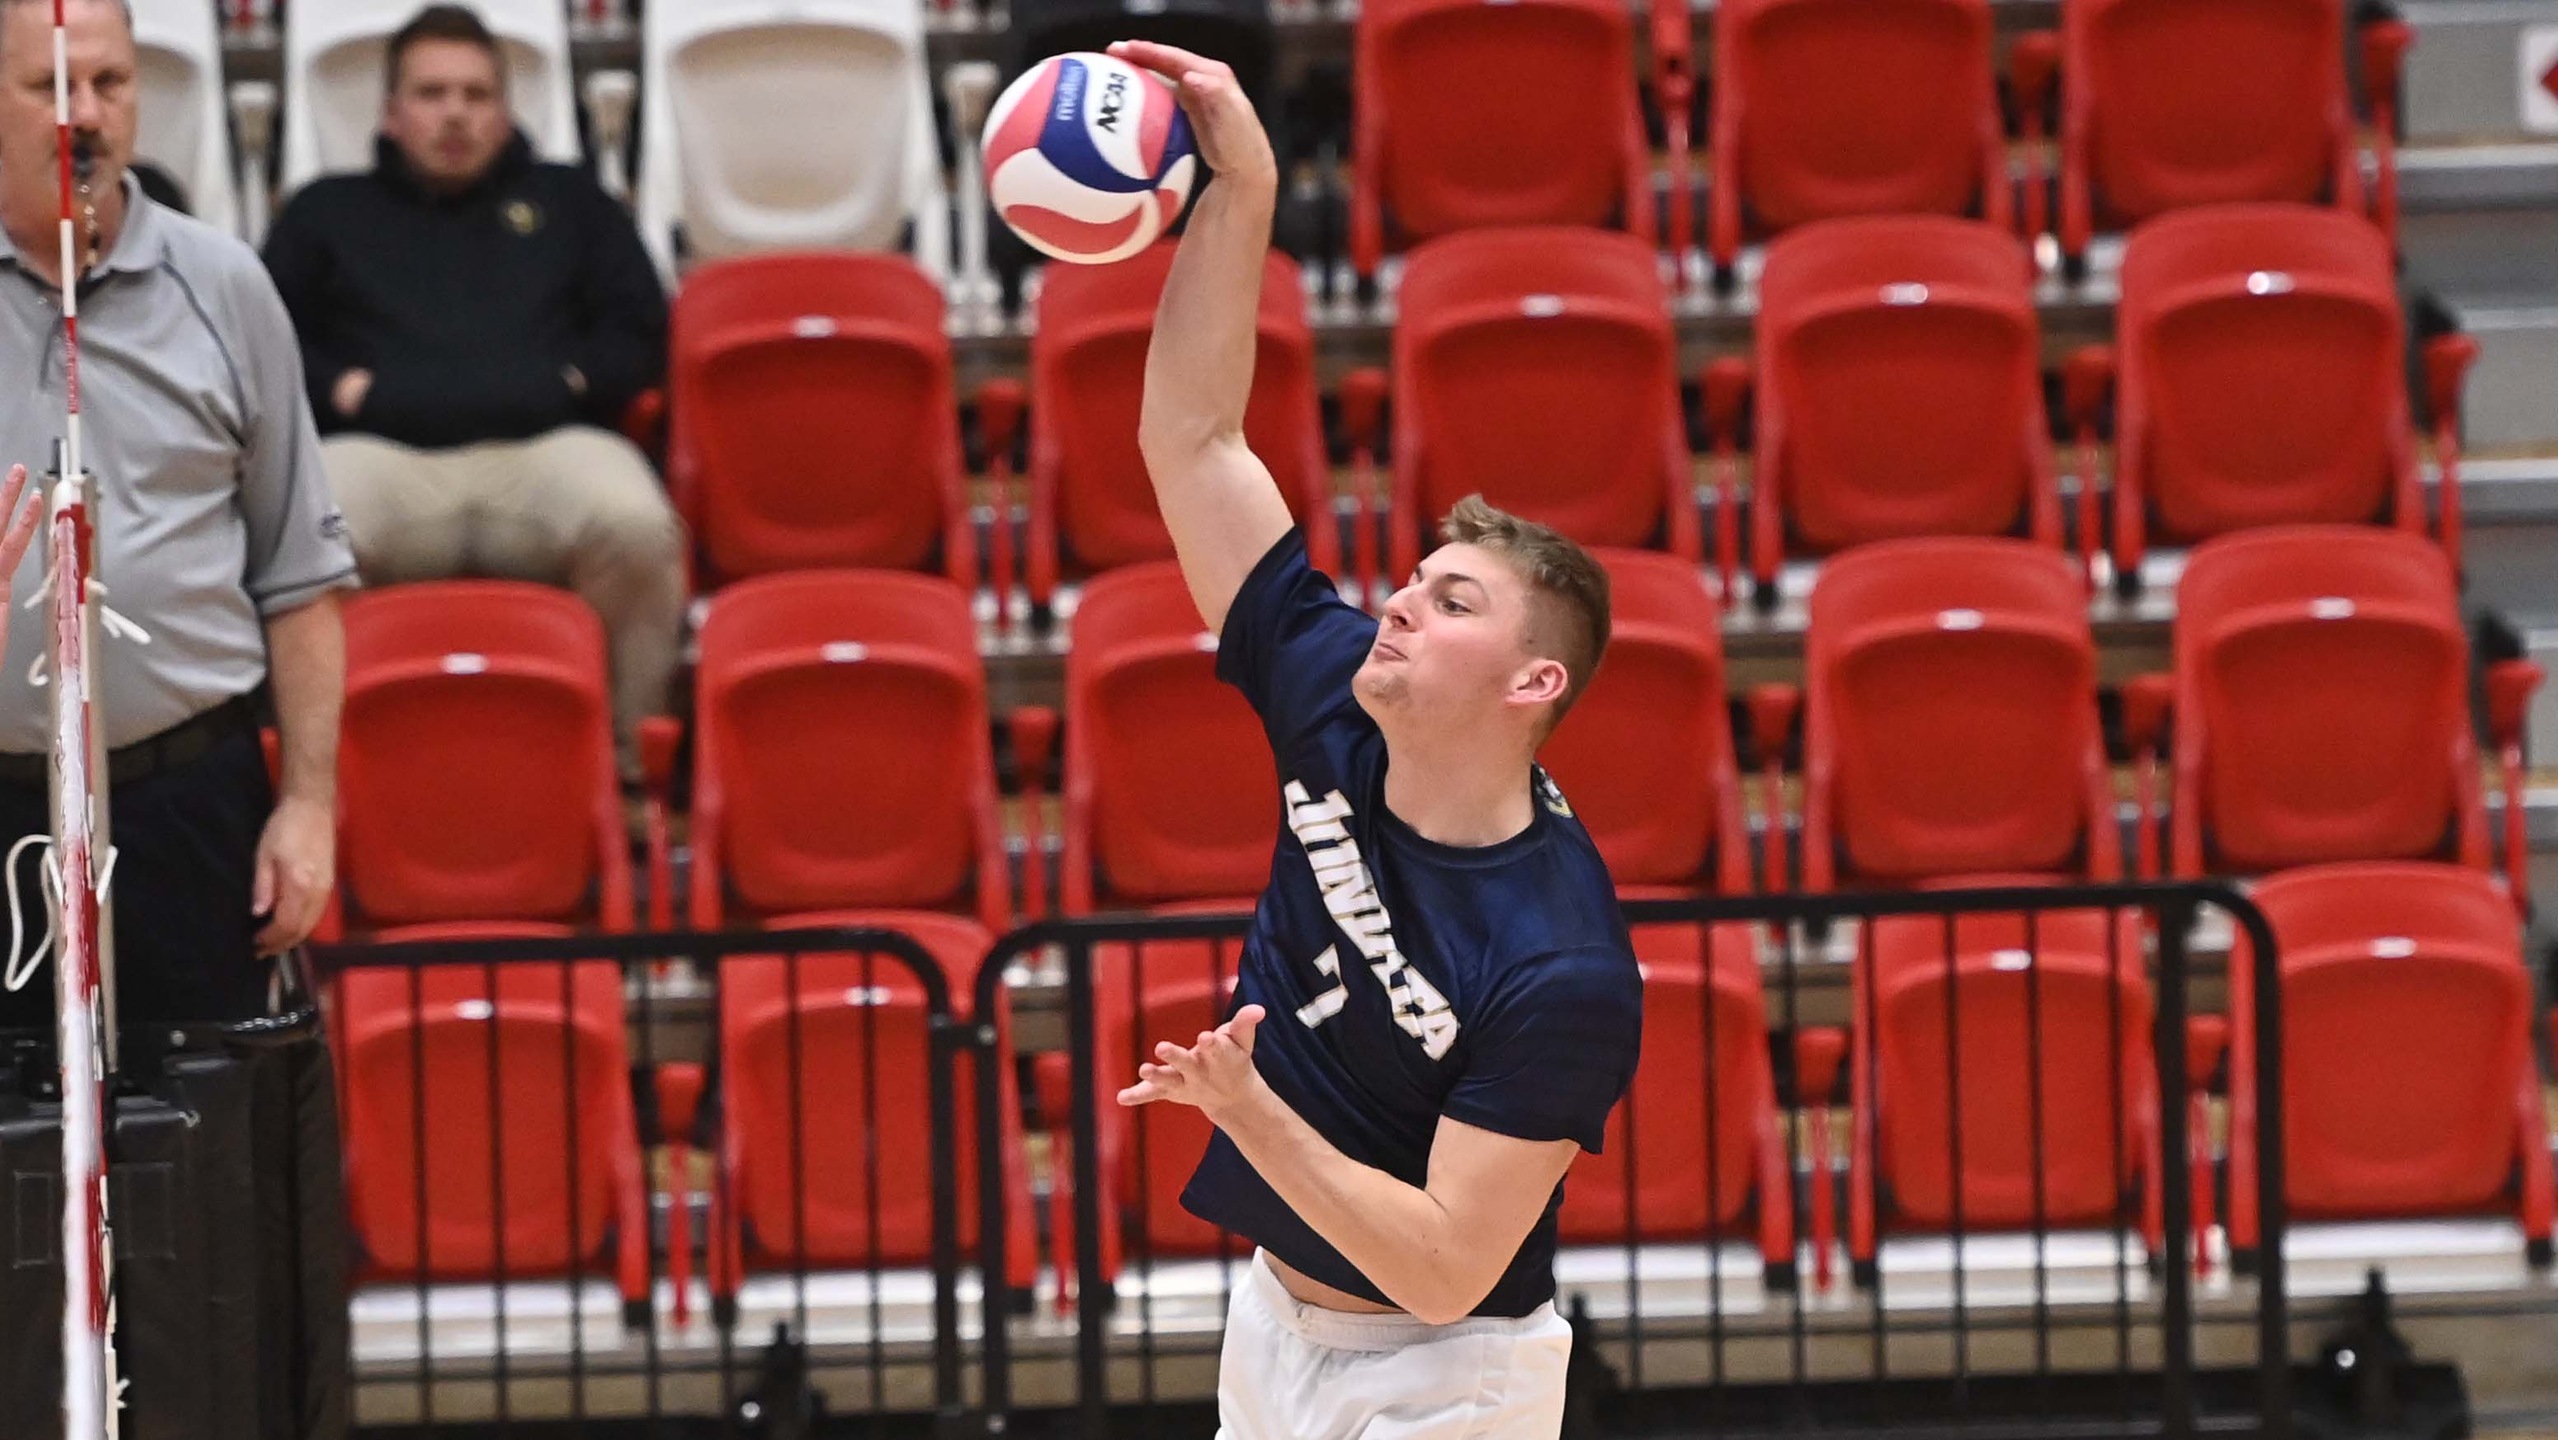 Eagles Take Down Kean for CVC Victory as DeHaven Becomes All-Time Wins Leader